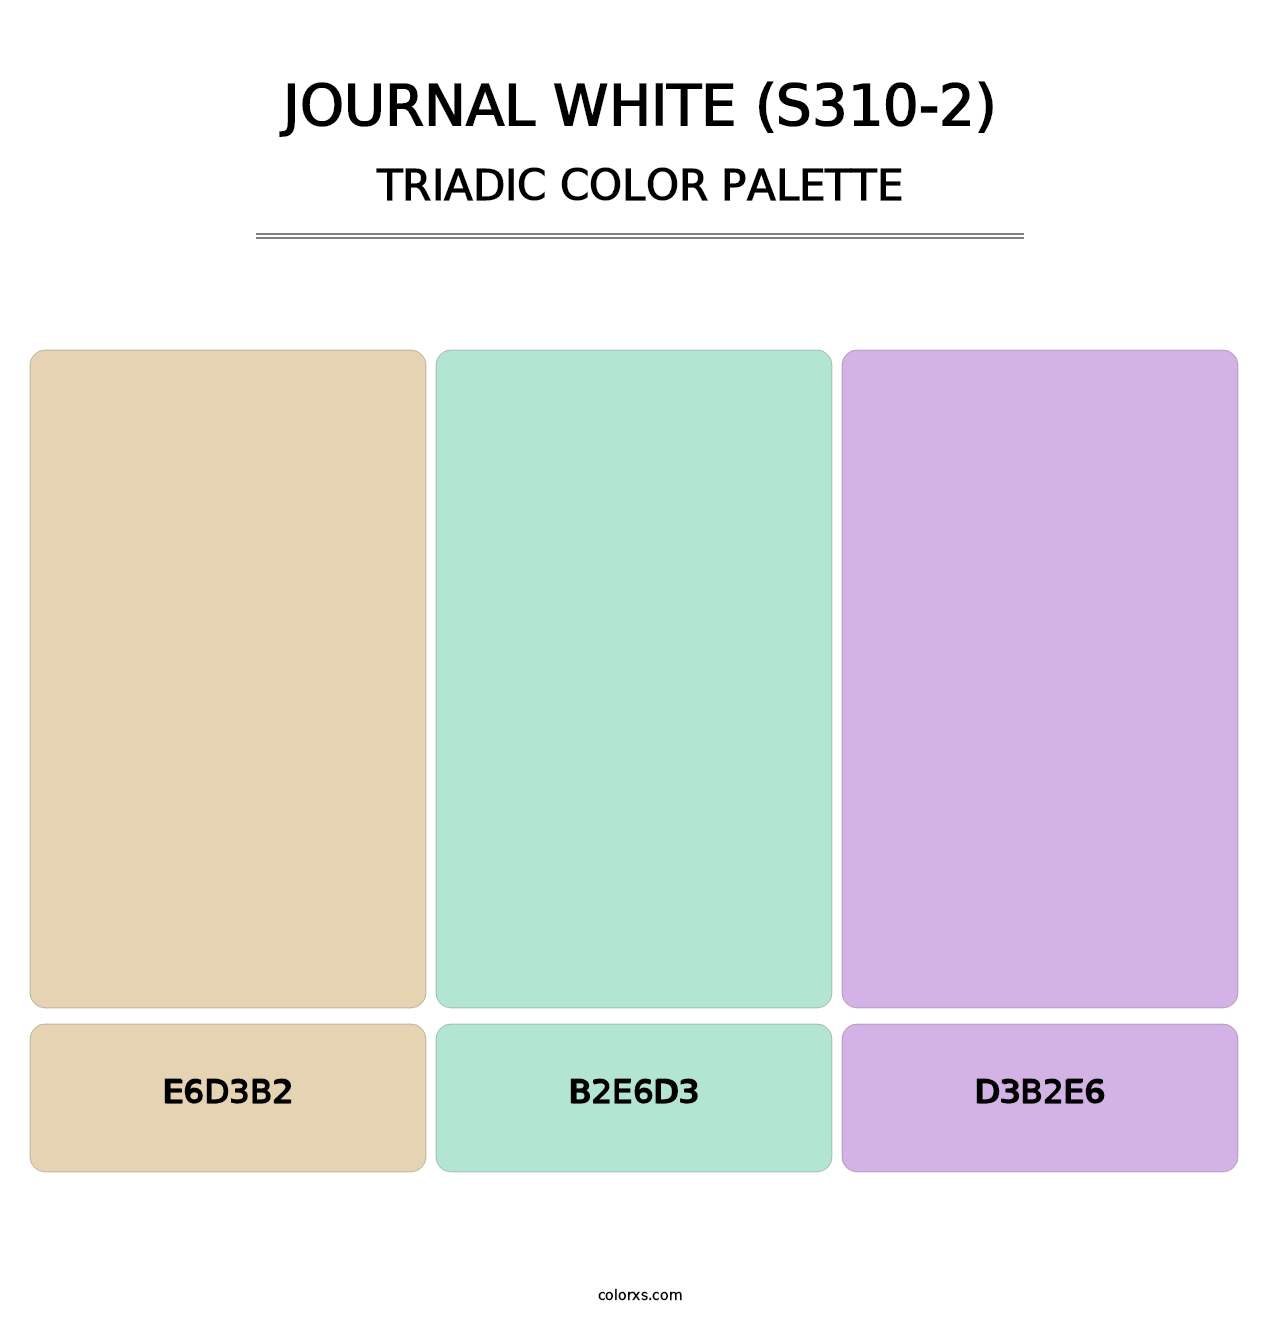 Journal White (S310-2) - Triadic Color Palette